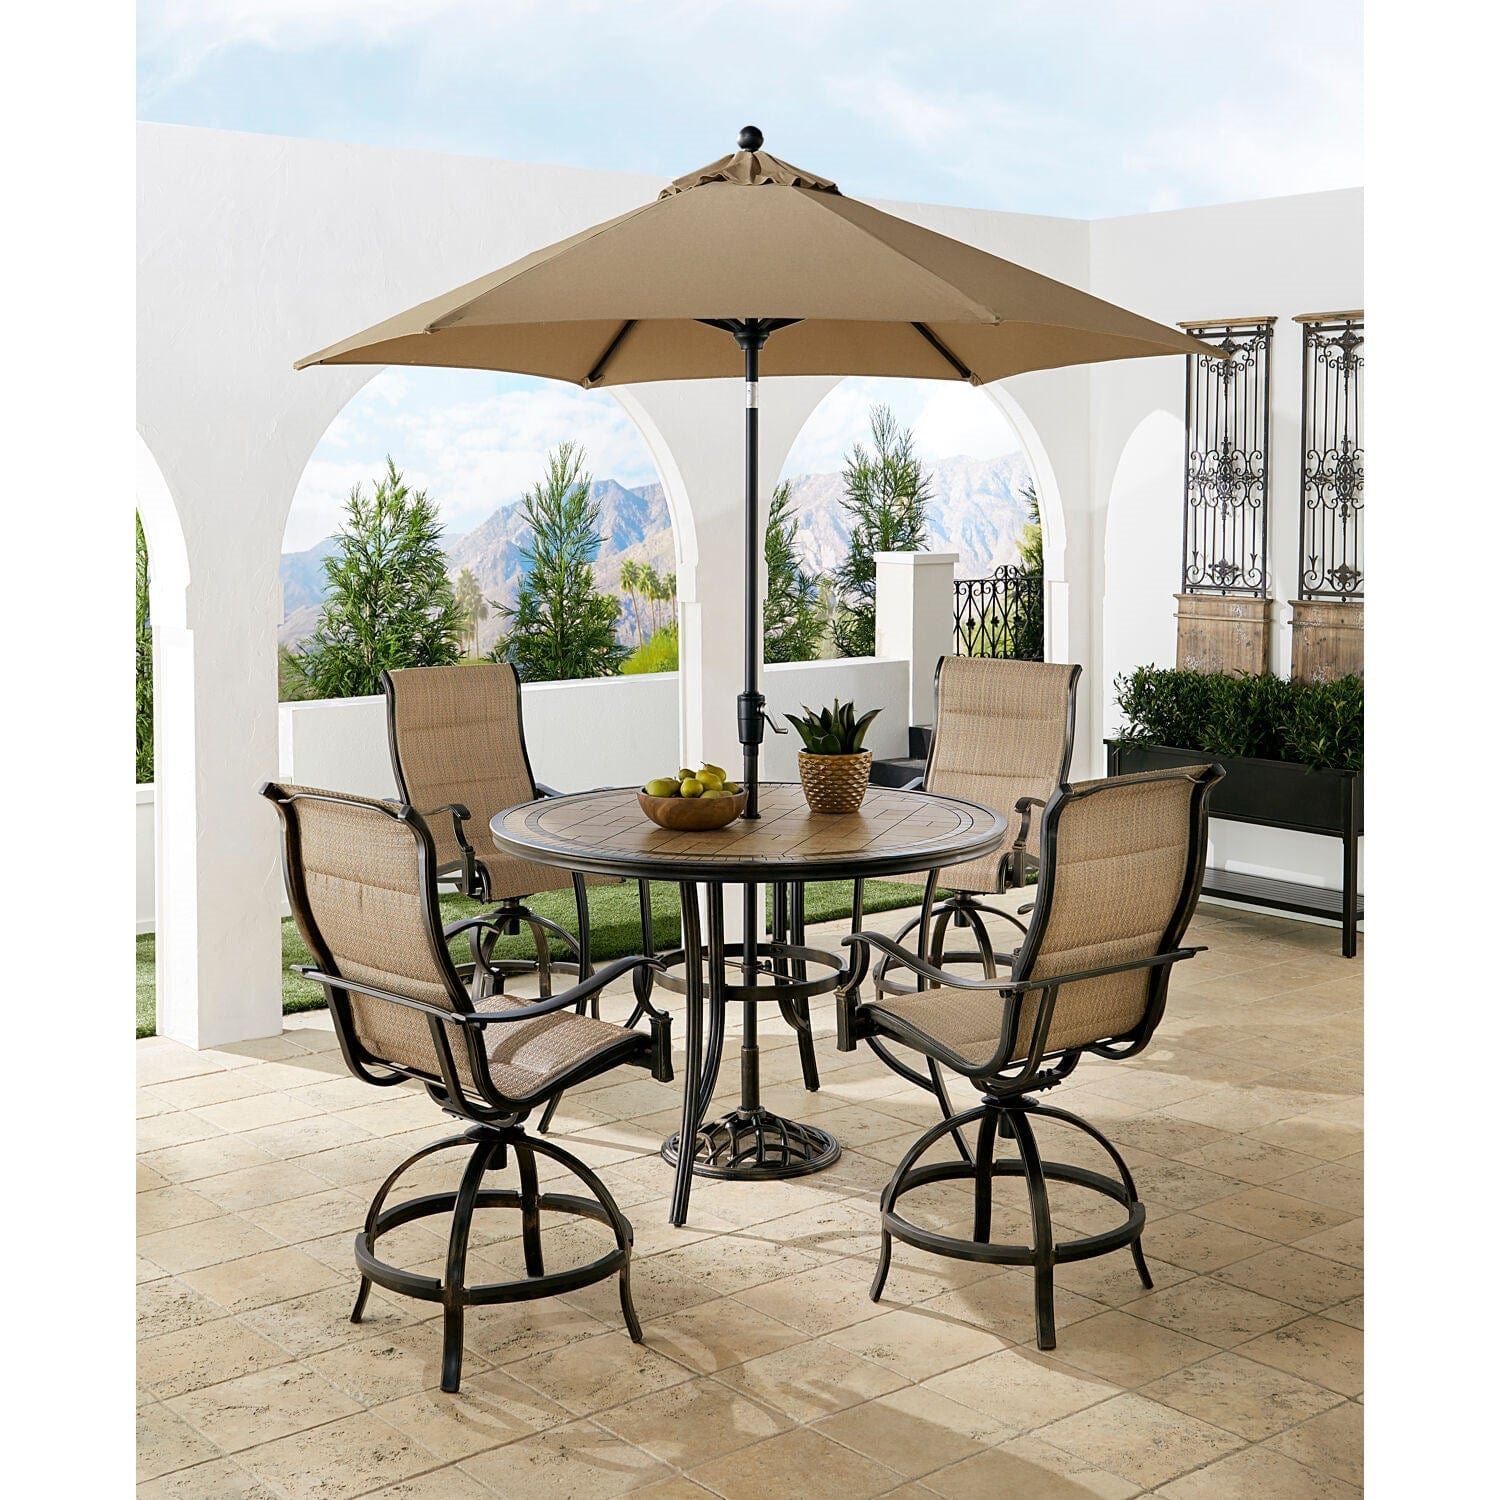 Hanover Outdoor Dining Set Hanover Monaco 5-Piece High-Dining Set in Tan with 4 Padded Counter-Height Swivel Chairs, 56-In. Tile-Top Table and 9-Ft. Umbrella | MONDN5PCPDBRC-SU-T